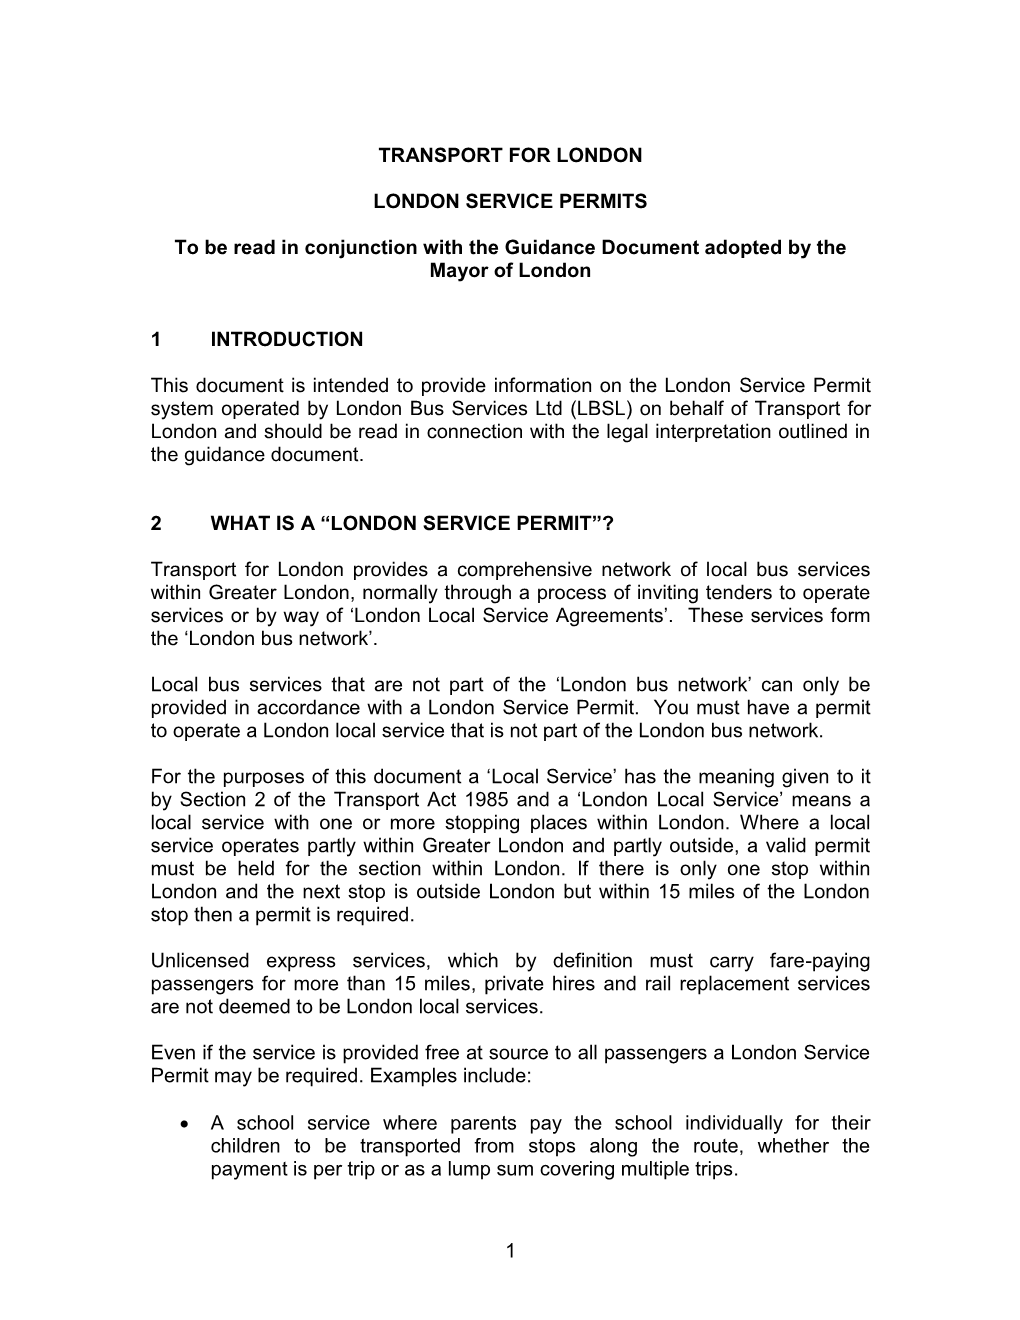 Guidance Document Adopted by the Mayor of London